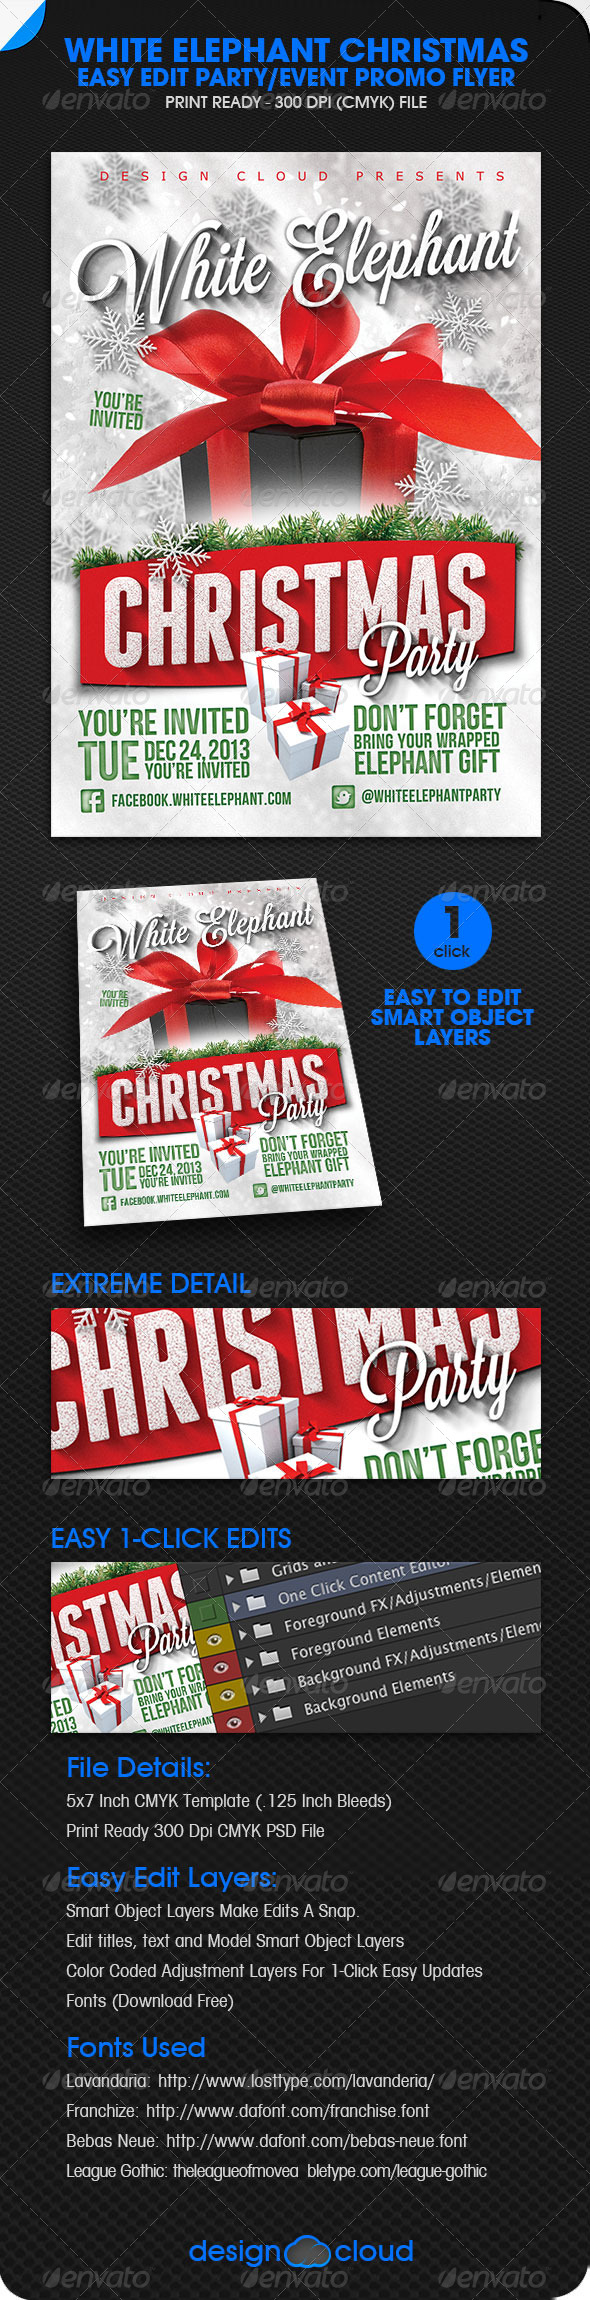 White Elephant Christmas Event Flyer By Design Cloud GraphicRiver